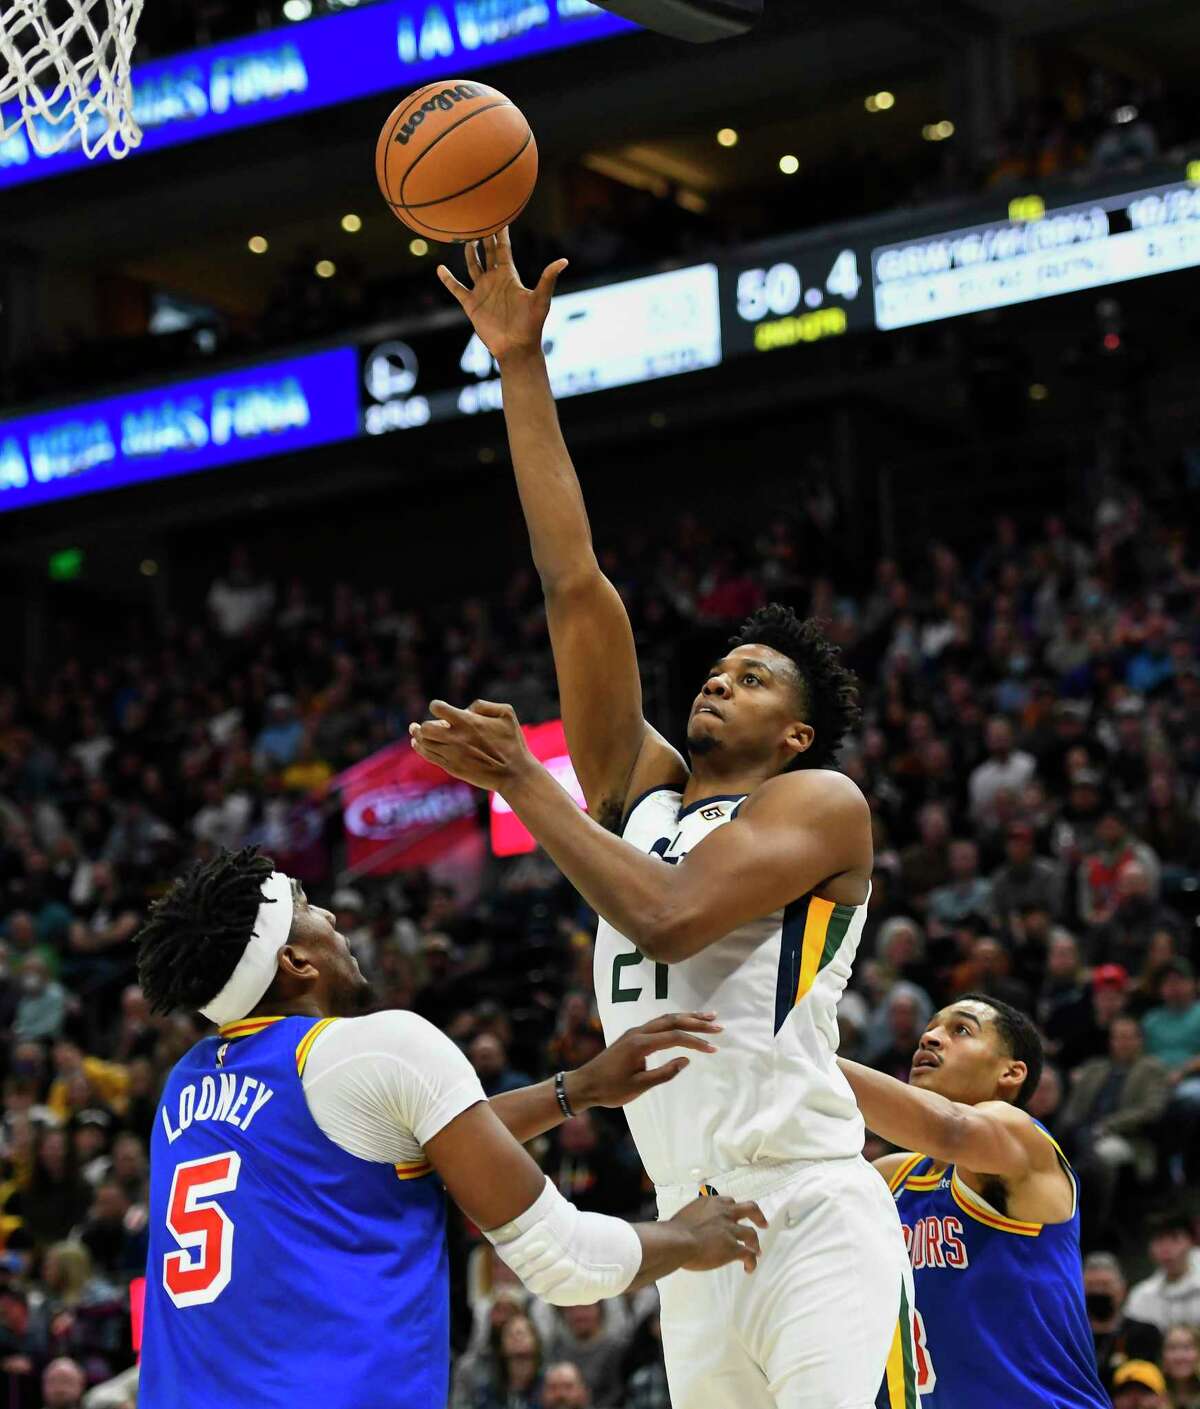 SALT LAKE CITY, UTAH - FEBRUARY 09: Hassan Whiteside #21 of the Utah Jazz shoots over Kevon Looney #5 of the Golden State Warriors during the first half of a game at Vivint Smart Home Arena on February 09, 2022 in Salt Lake City, Utah. NOTE TO USER: User expressly acknowledges and agrees that, by downloading and or using this photograph, User is consenting to the terms and conditions of the Getty Images License Agreement. (Photo by Alex Goodlett/Getty Images)